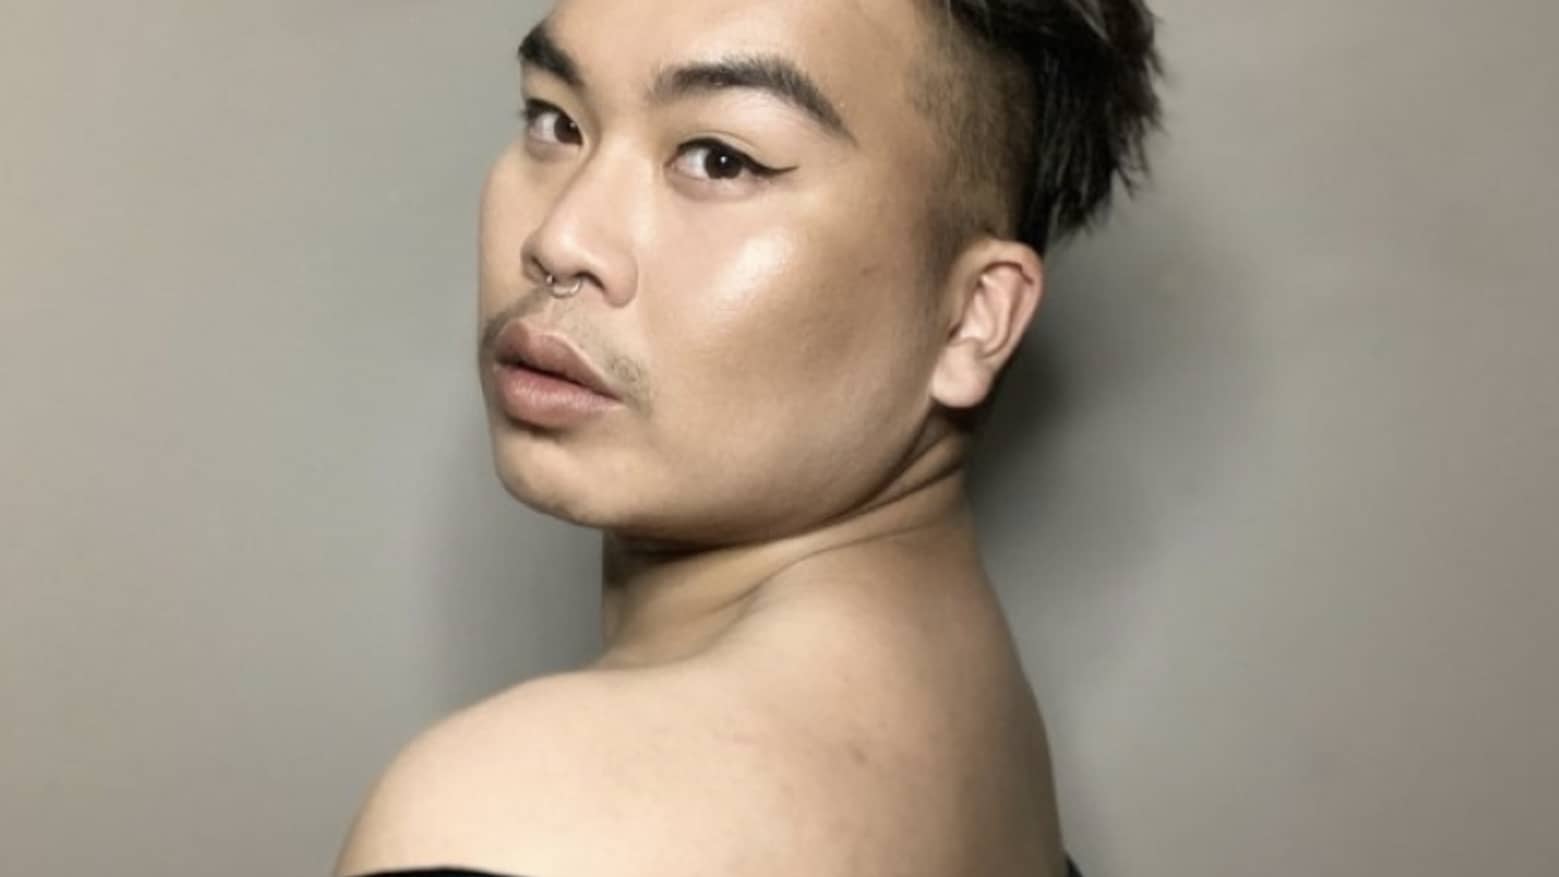 Paul Tran will read from All the Flowers Kneeling (Penguin, 2022), their debut poetry collection, investigating trauma, freedom, power and control. Press photo courtesy of Bennington College